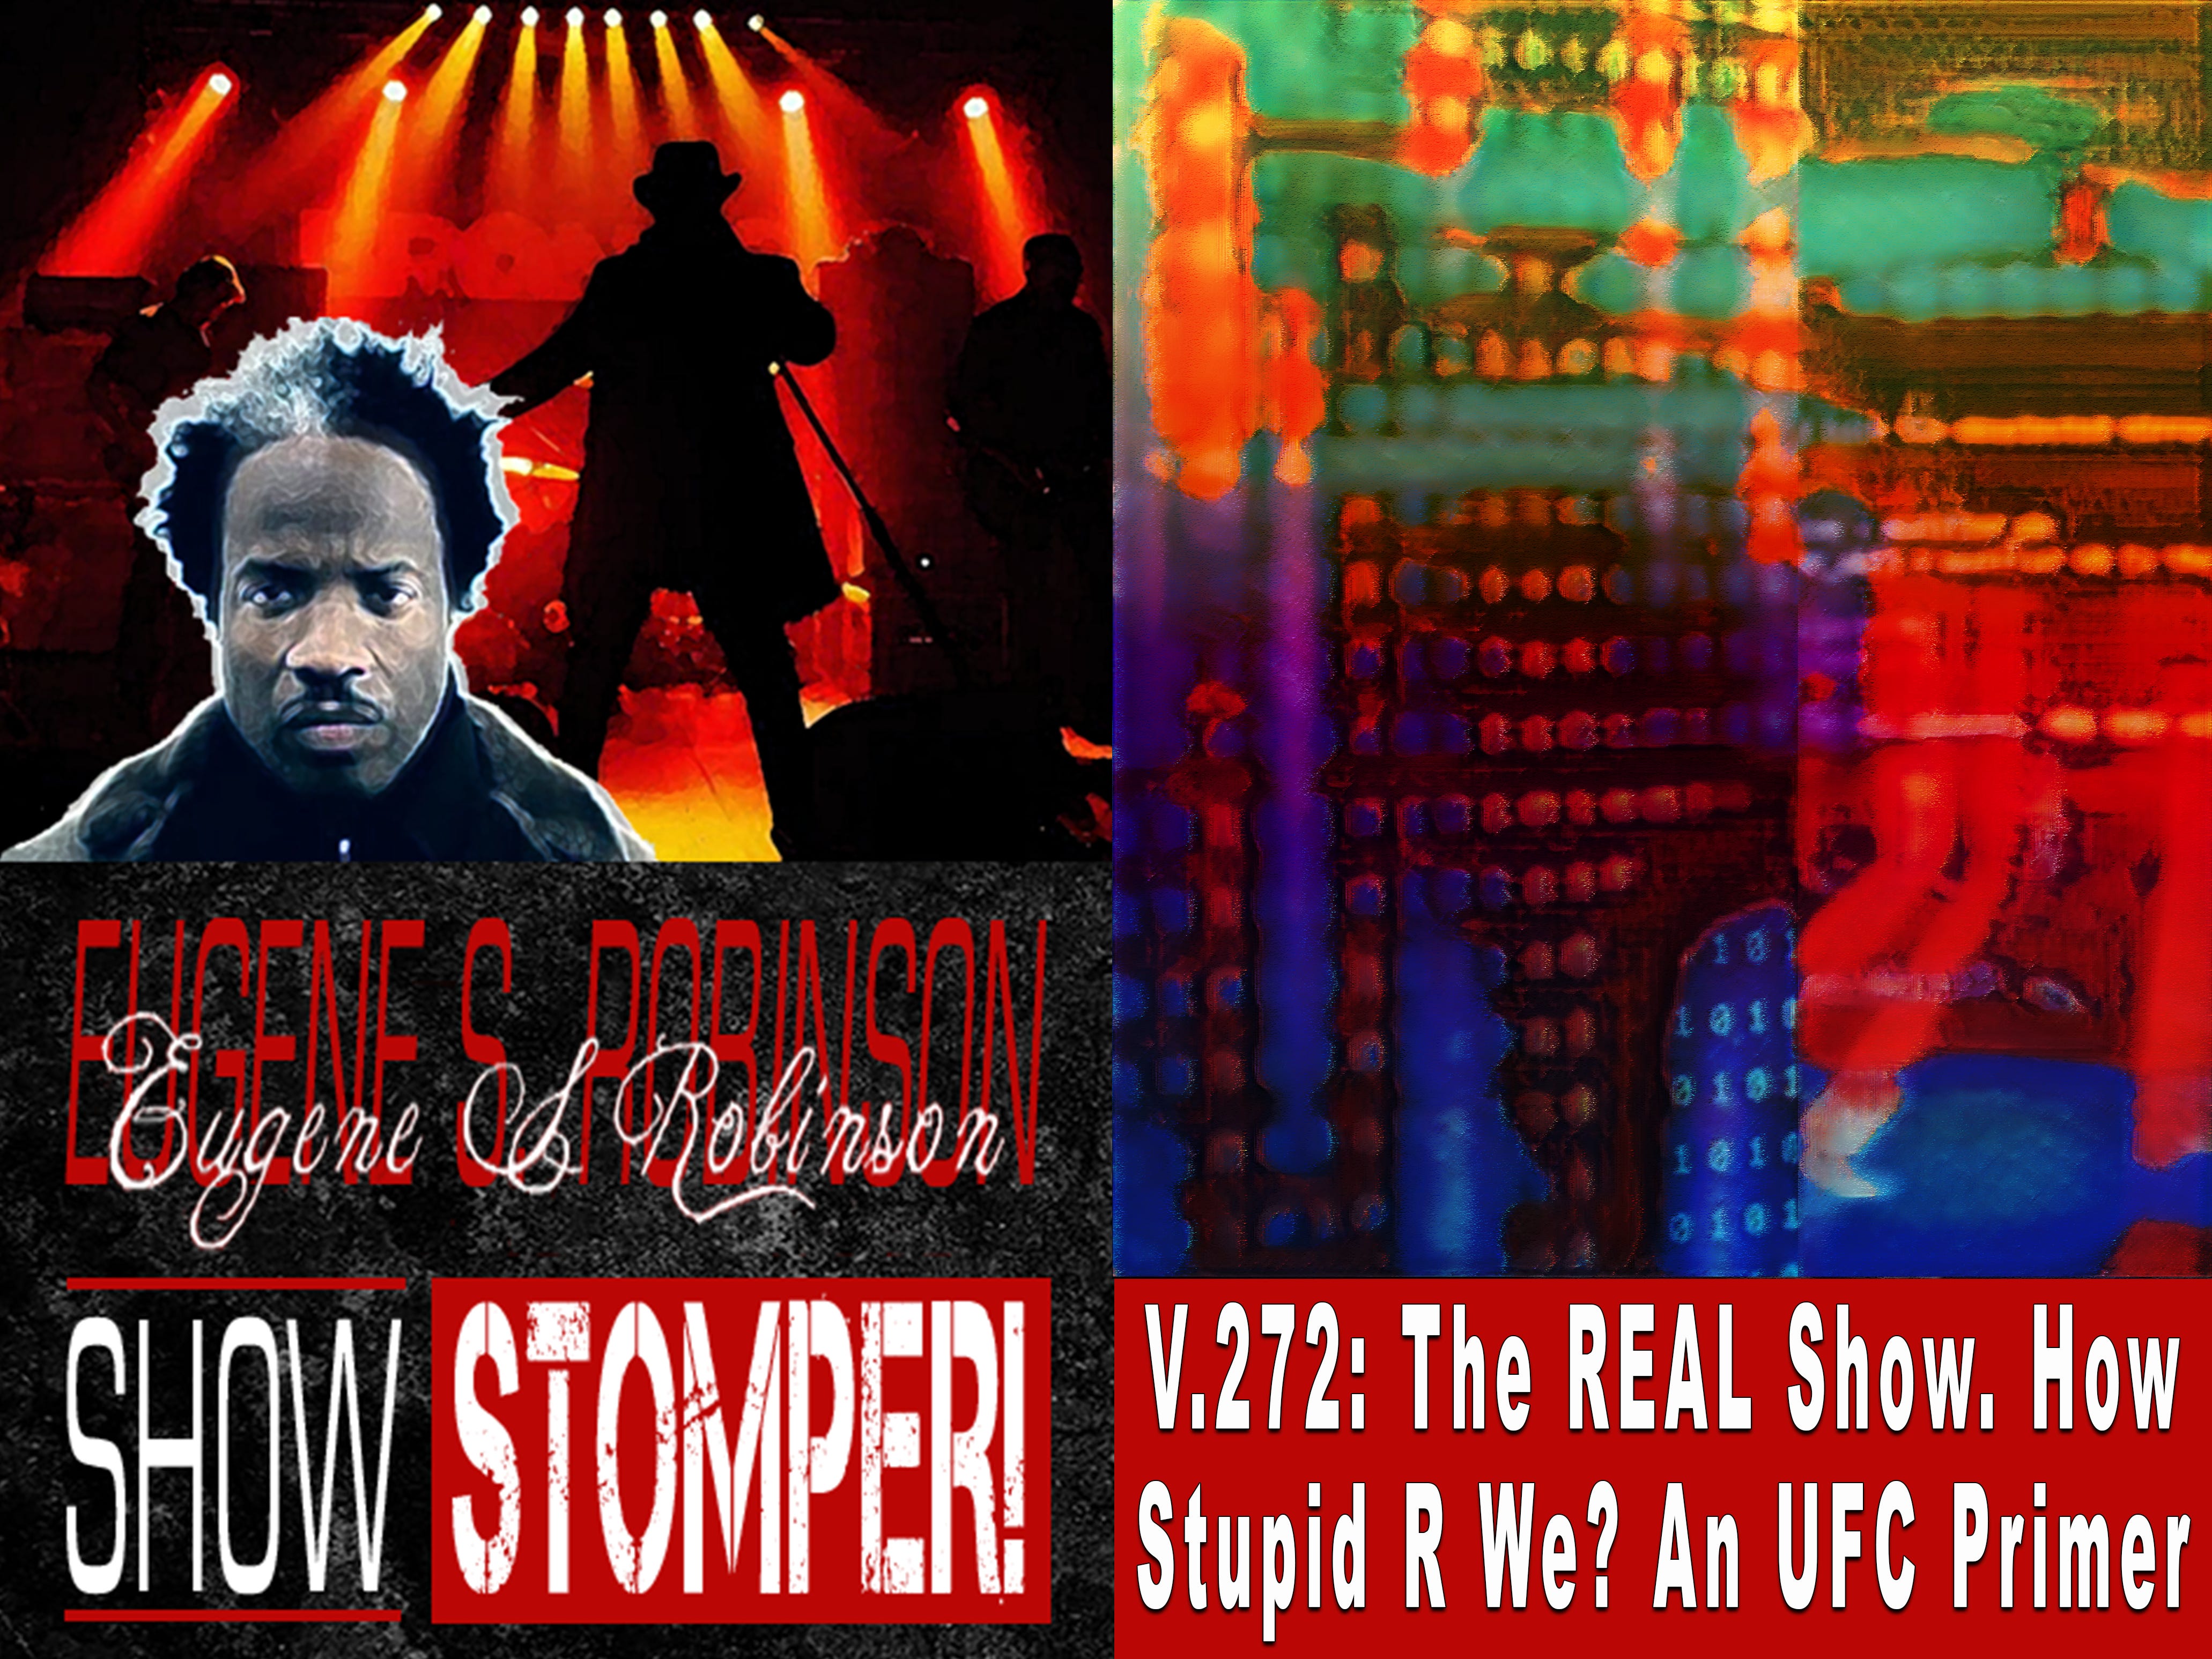 V.272: The REAL Show. How Stupid R We? An UFC Primer on The Eugene S. Robinson Show Stomper!